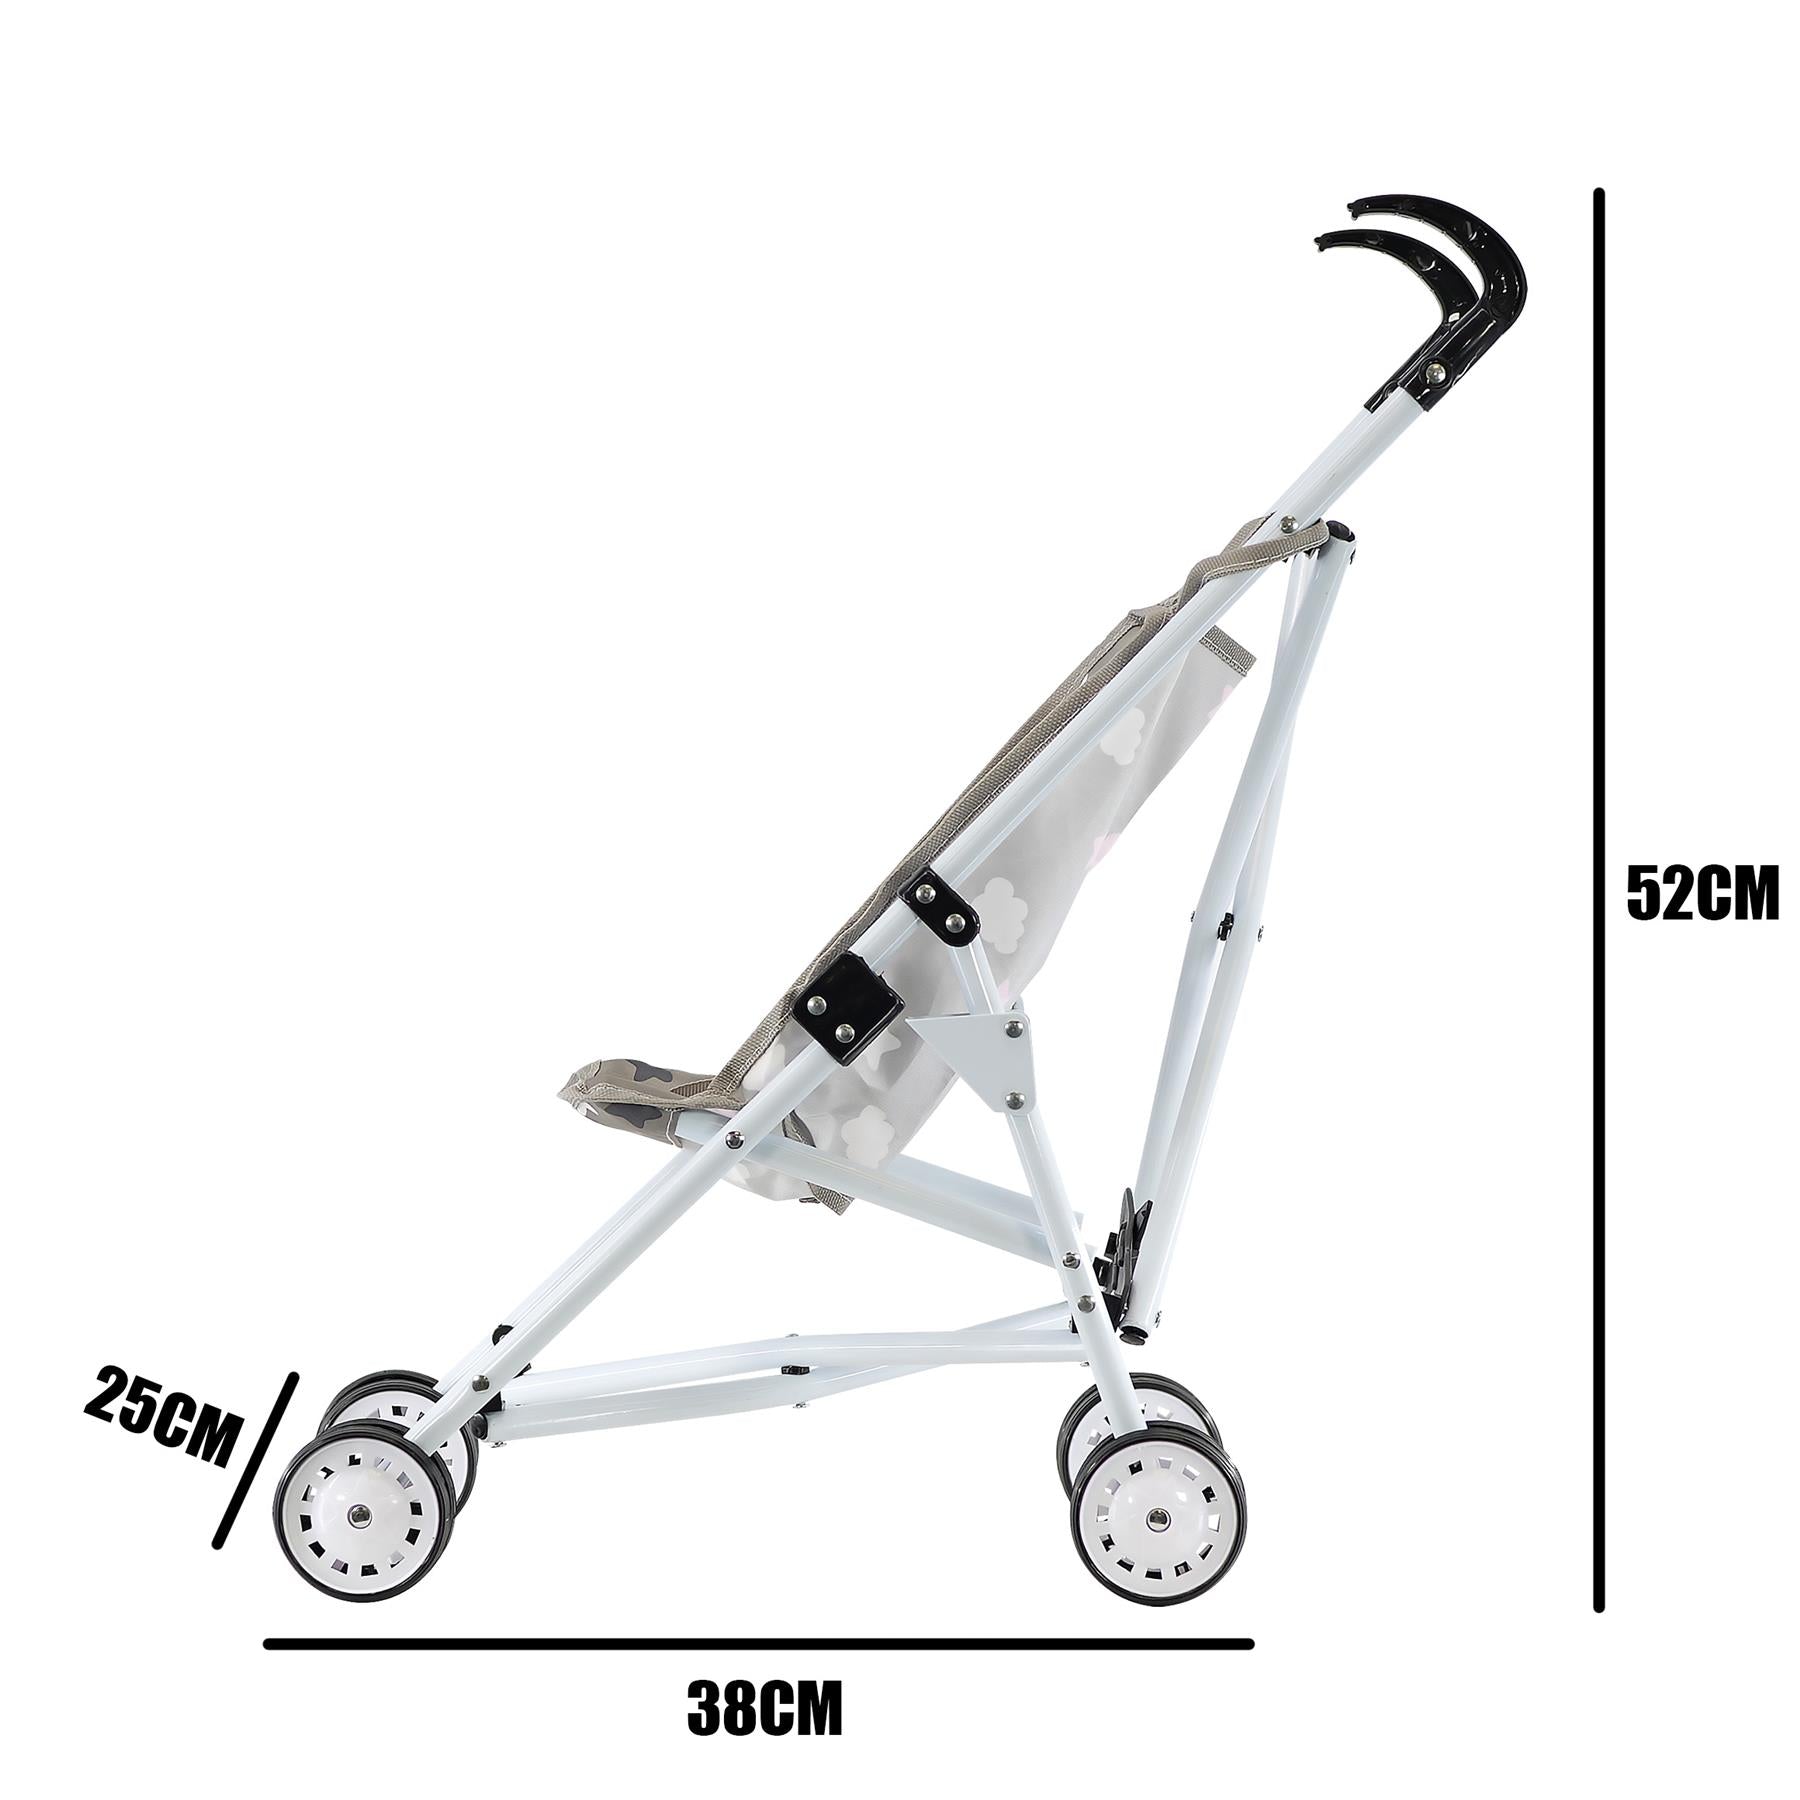 Stars Baby Doll Foldable Stroller by BiBi Doll - The Magic Toy Shop